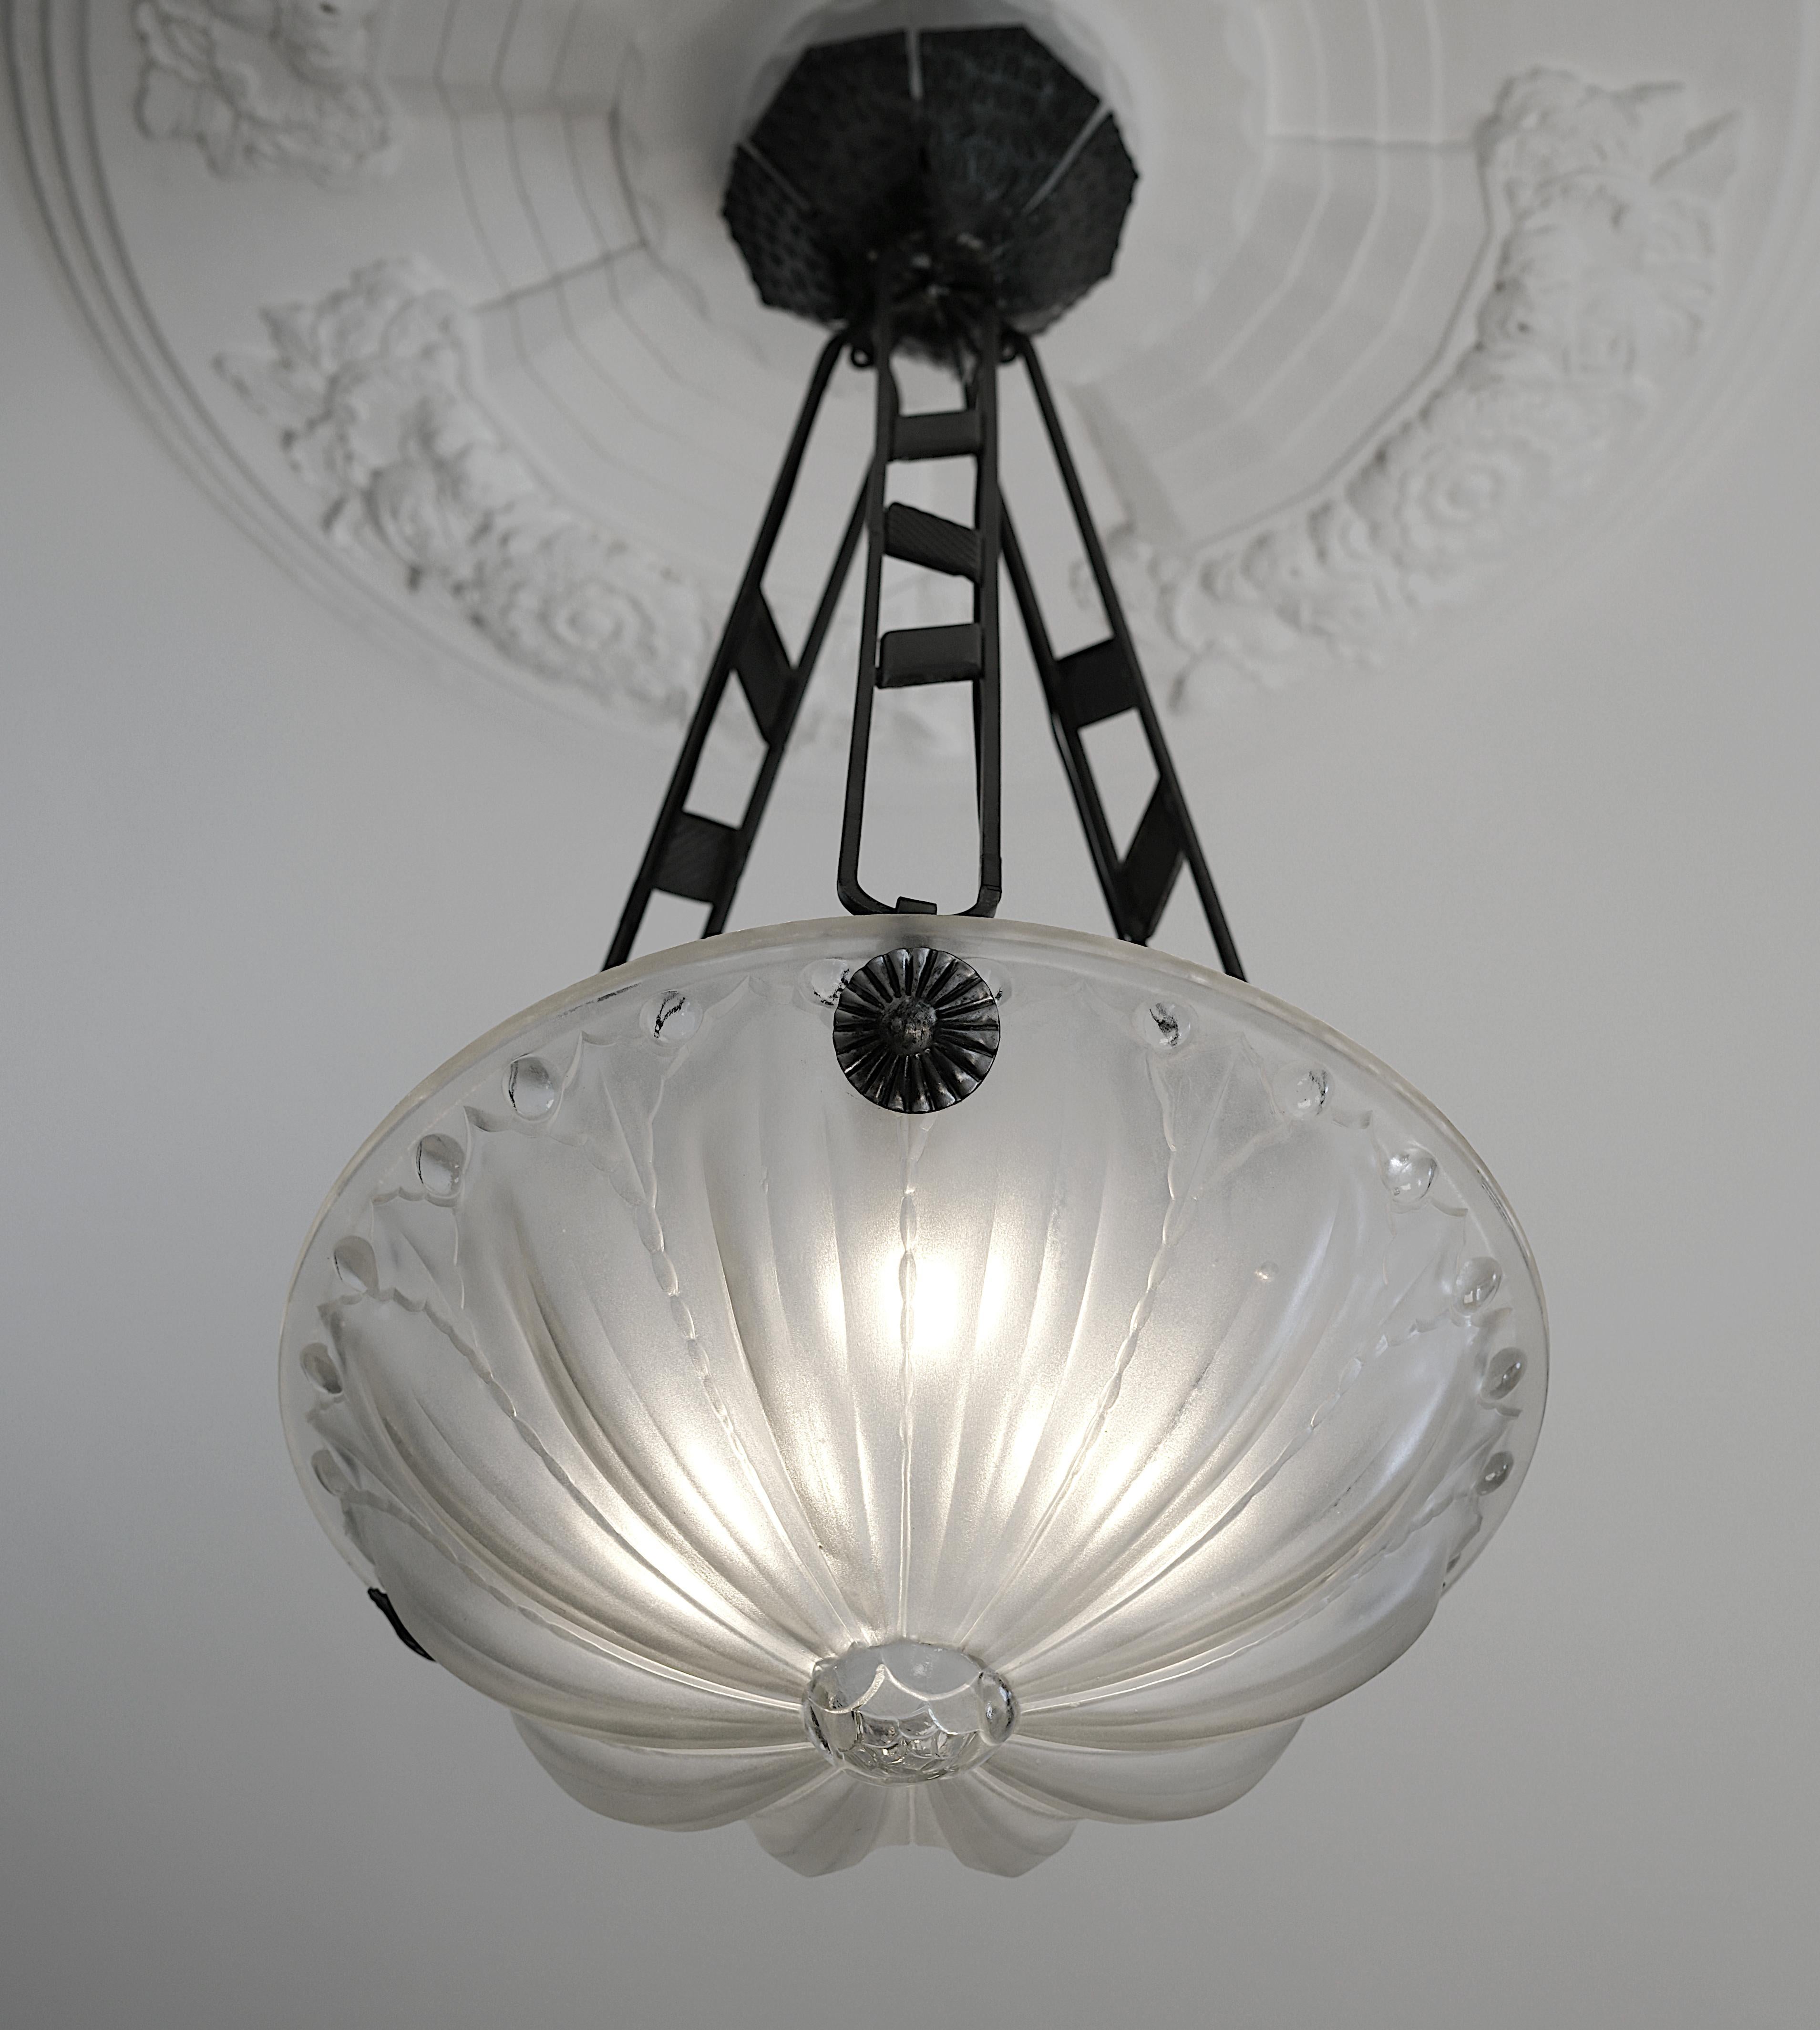 French Art Deco pendant chandelier by Société Normande de Verreries SONOVER, 11, rue Nationale - Aumale, France, 1920s. Thick frosted molded glass shade hung at its iron fixture. Height : 26.8